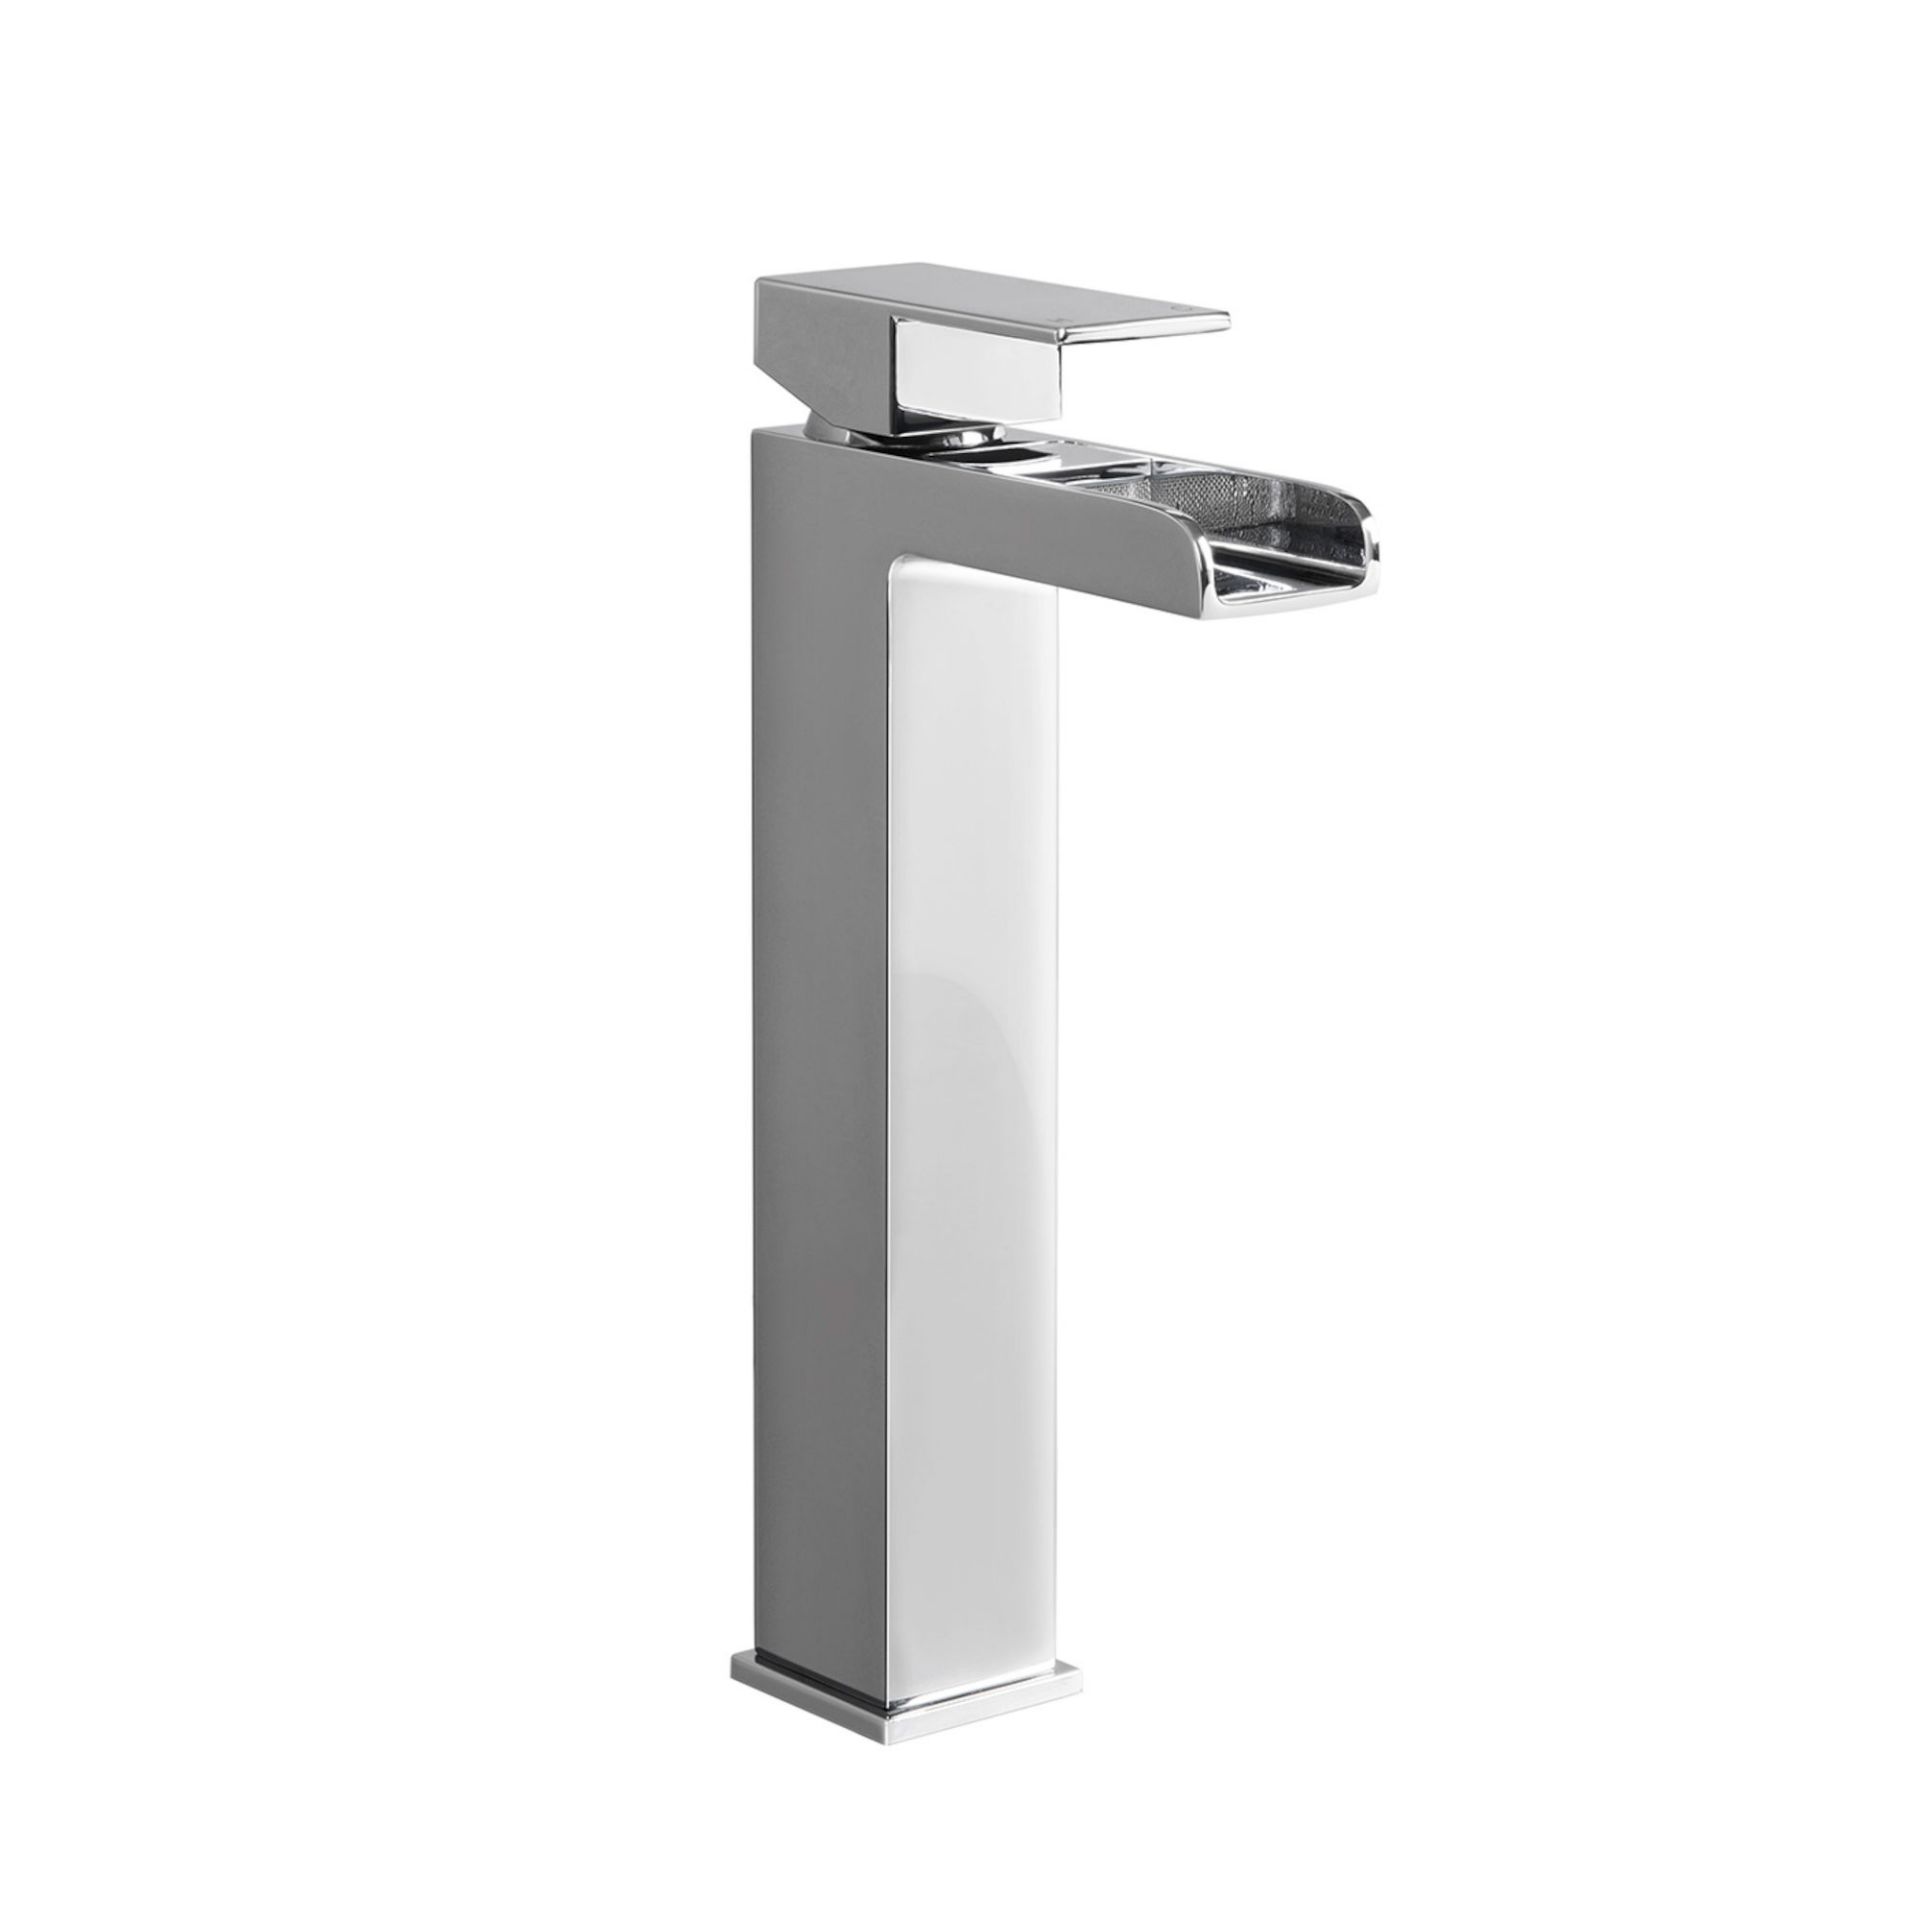 (NK135) Niagra II Counter Top Basin Mixer Tap Pair with a counter top unit to sit perfectly above - Image 2 of 3